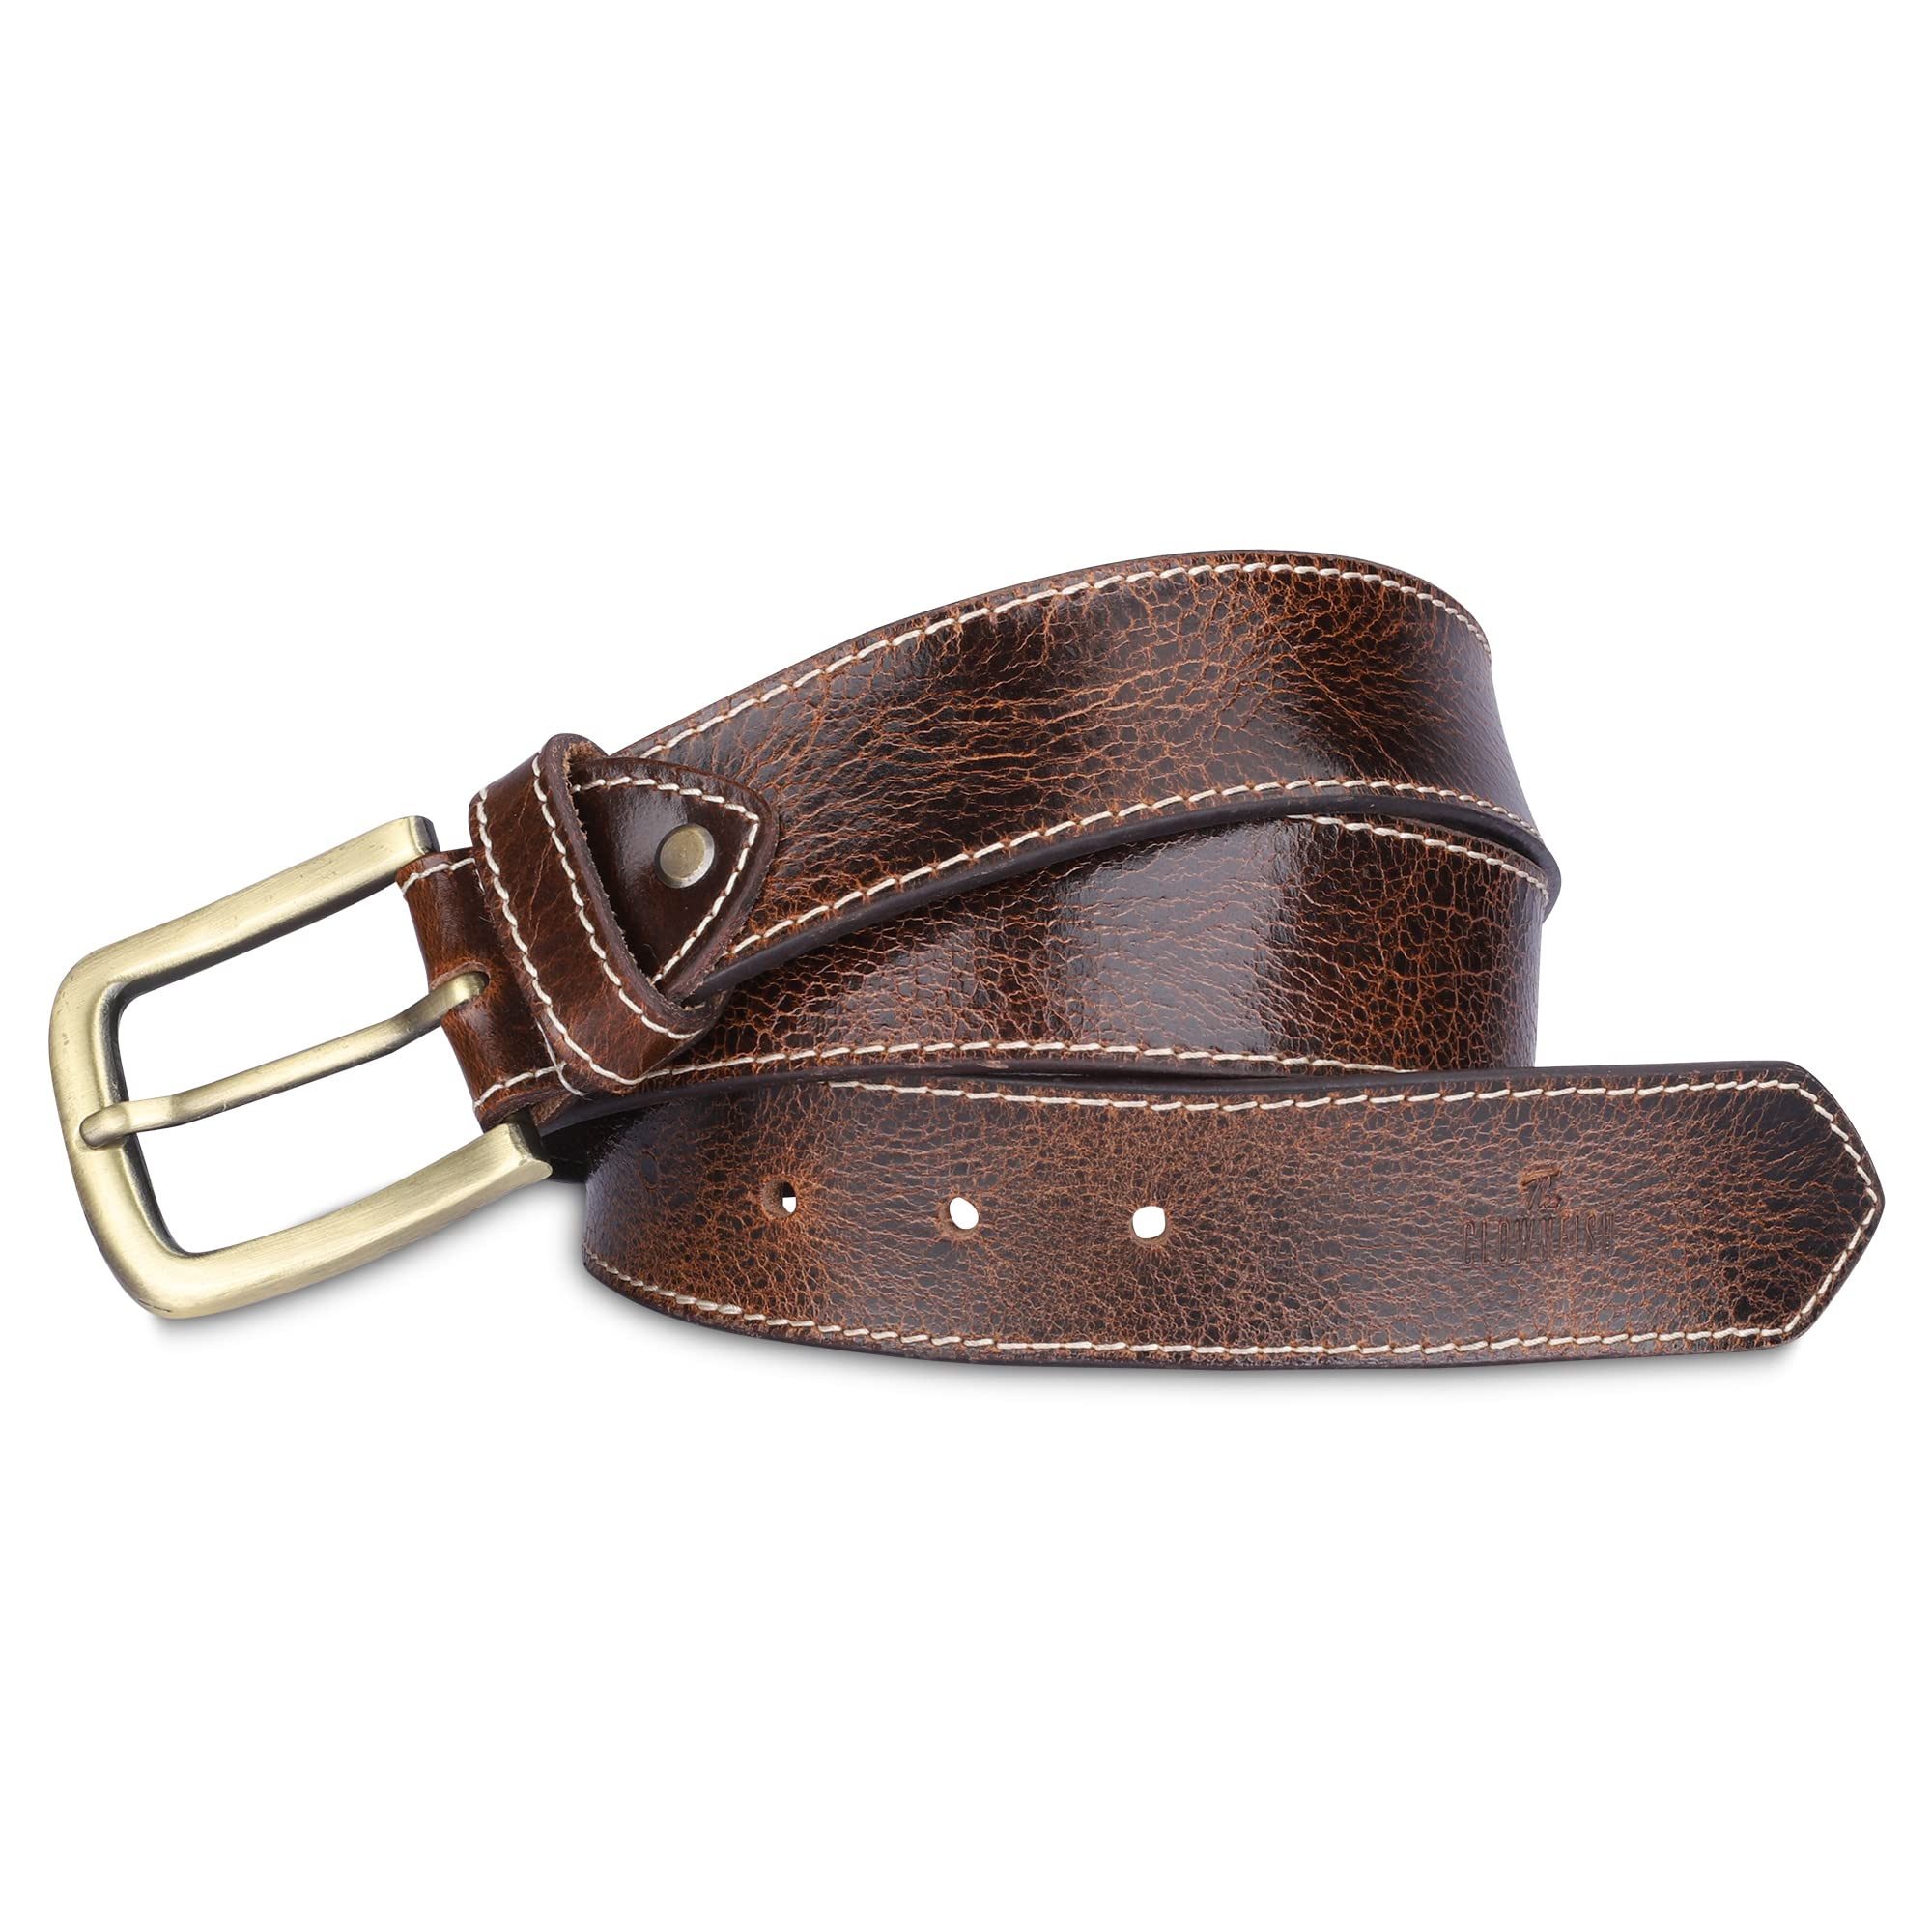 THE CLOWNFISH Men's Genuine Leather Belts - Brown (Size-36 inches)